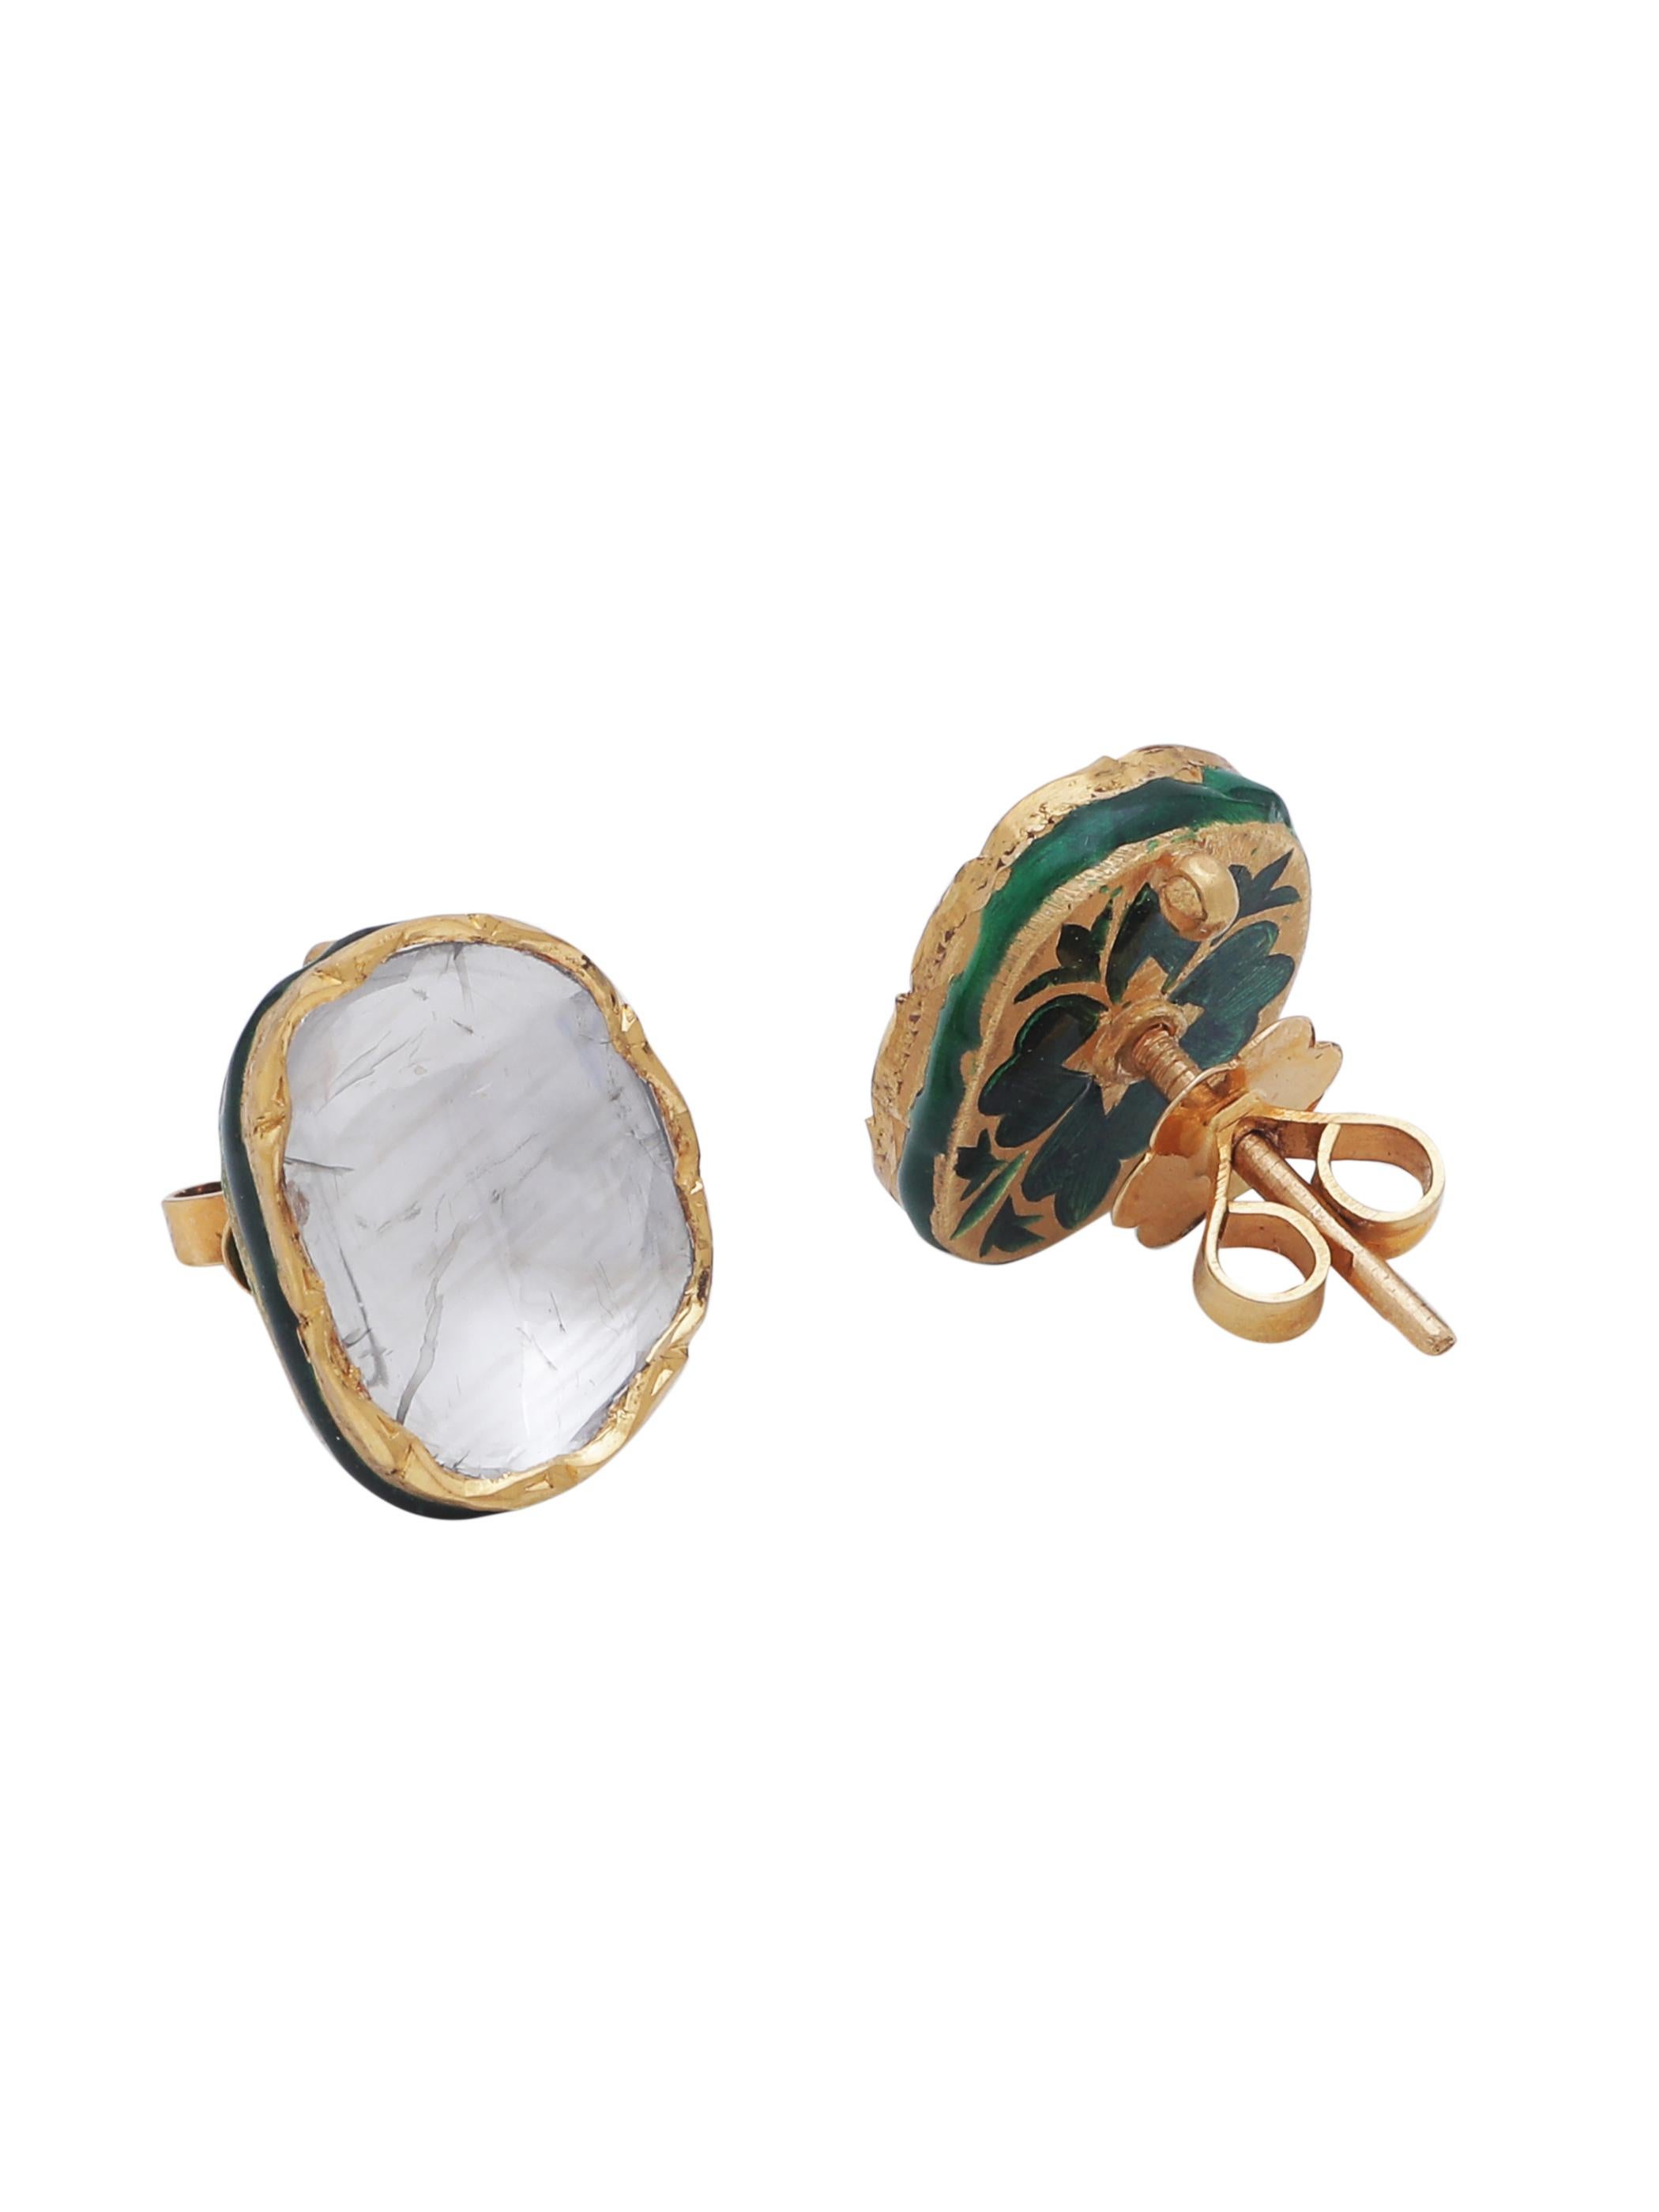 A pair of studs with 2 large Uncut Diamonds weighing 2.48 carats together. The earring is handcrafted in 18K Yellow gold and has really fine green enamel work at the back. The fine 